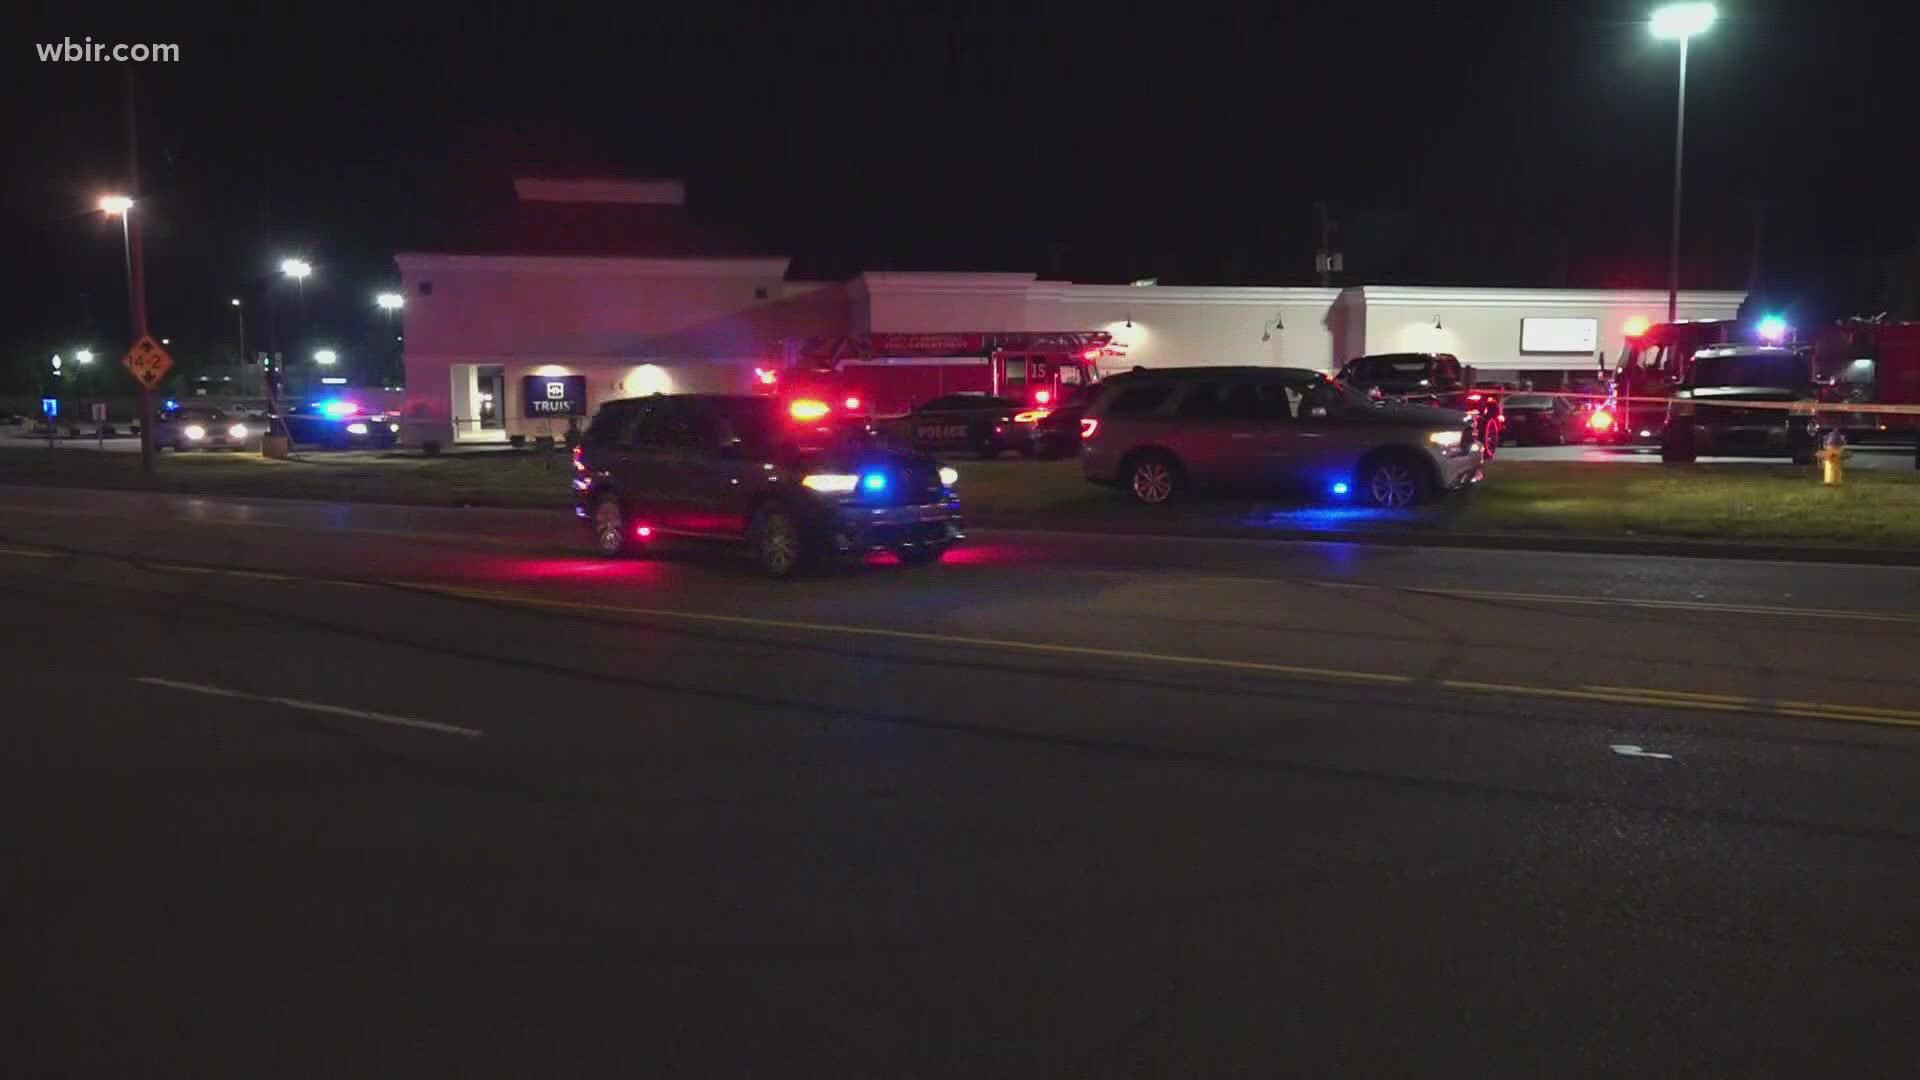 Police said a 46-year-old man and a 30-year-old man were killed in the parking lot of Hatmaker's Bar and Grill Friday night.